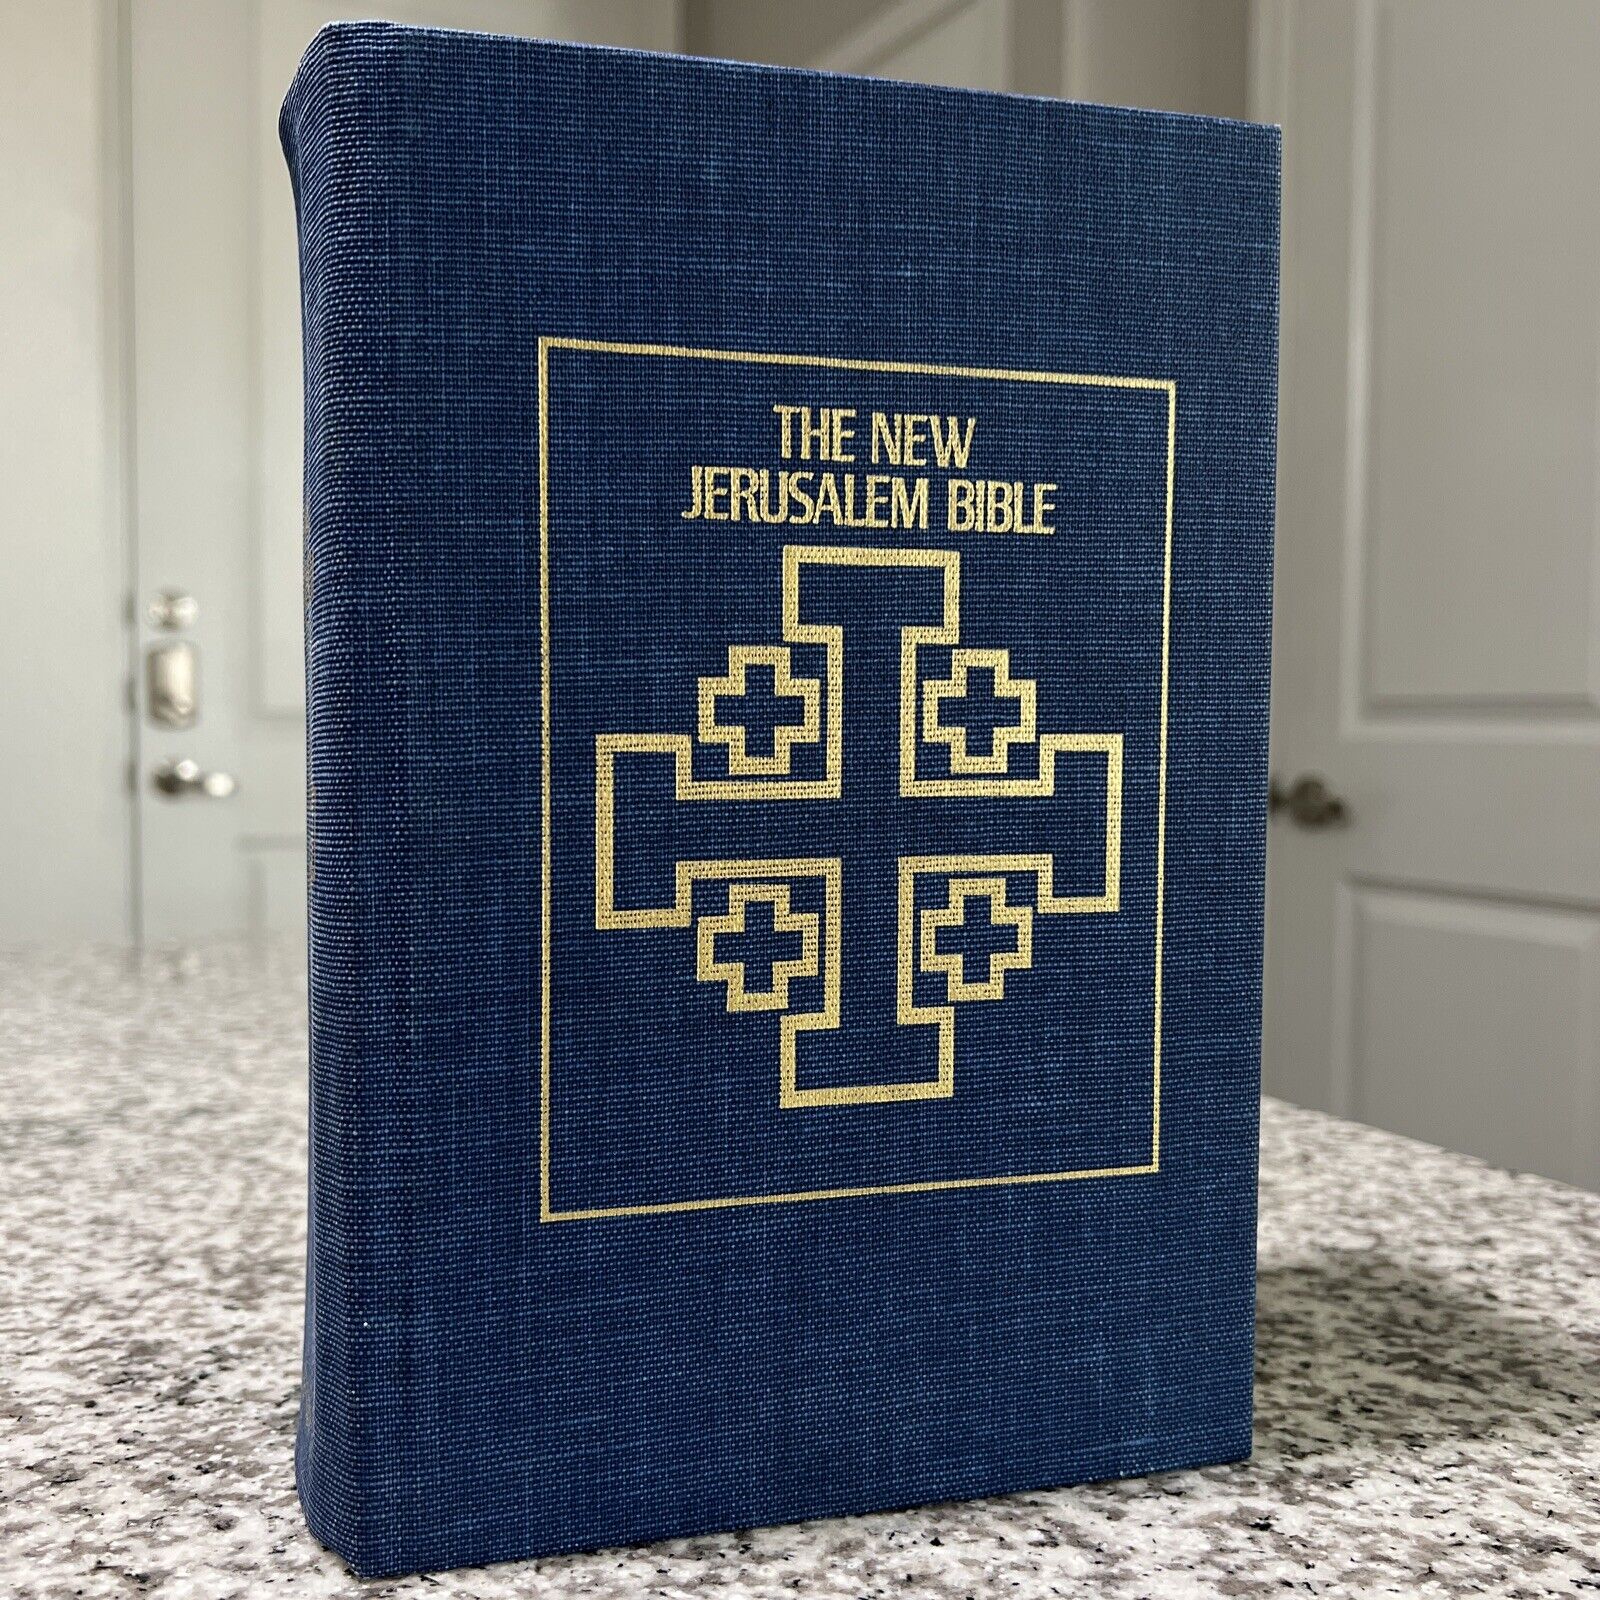 The New Jerusalem Bible DoubleDay 1985 Edition Hard Cover w/ Slipcover, GC